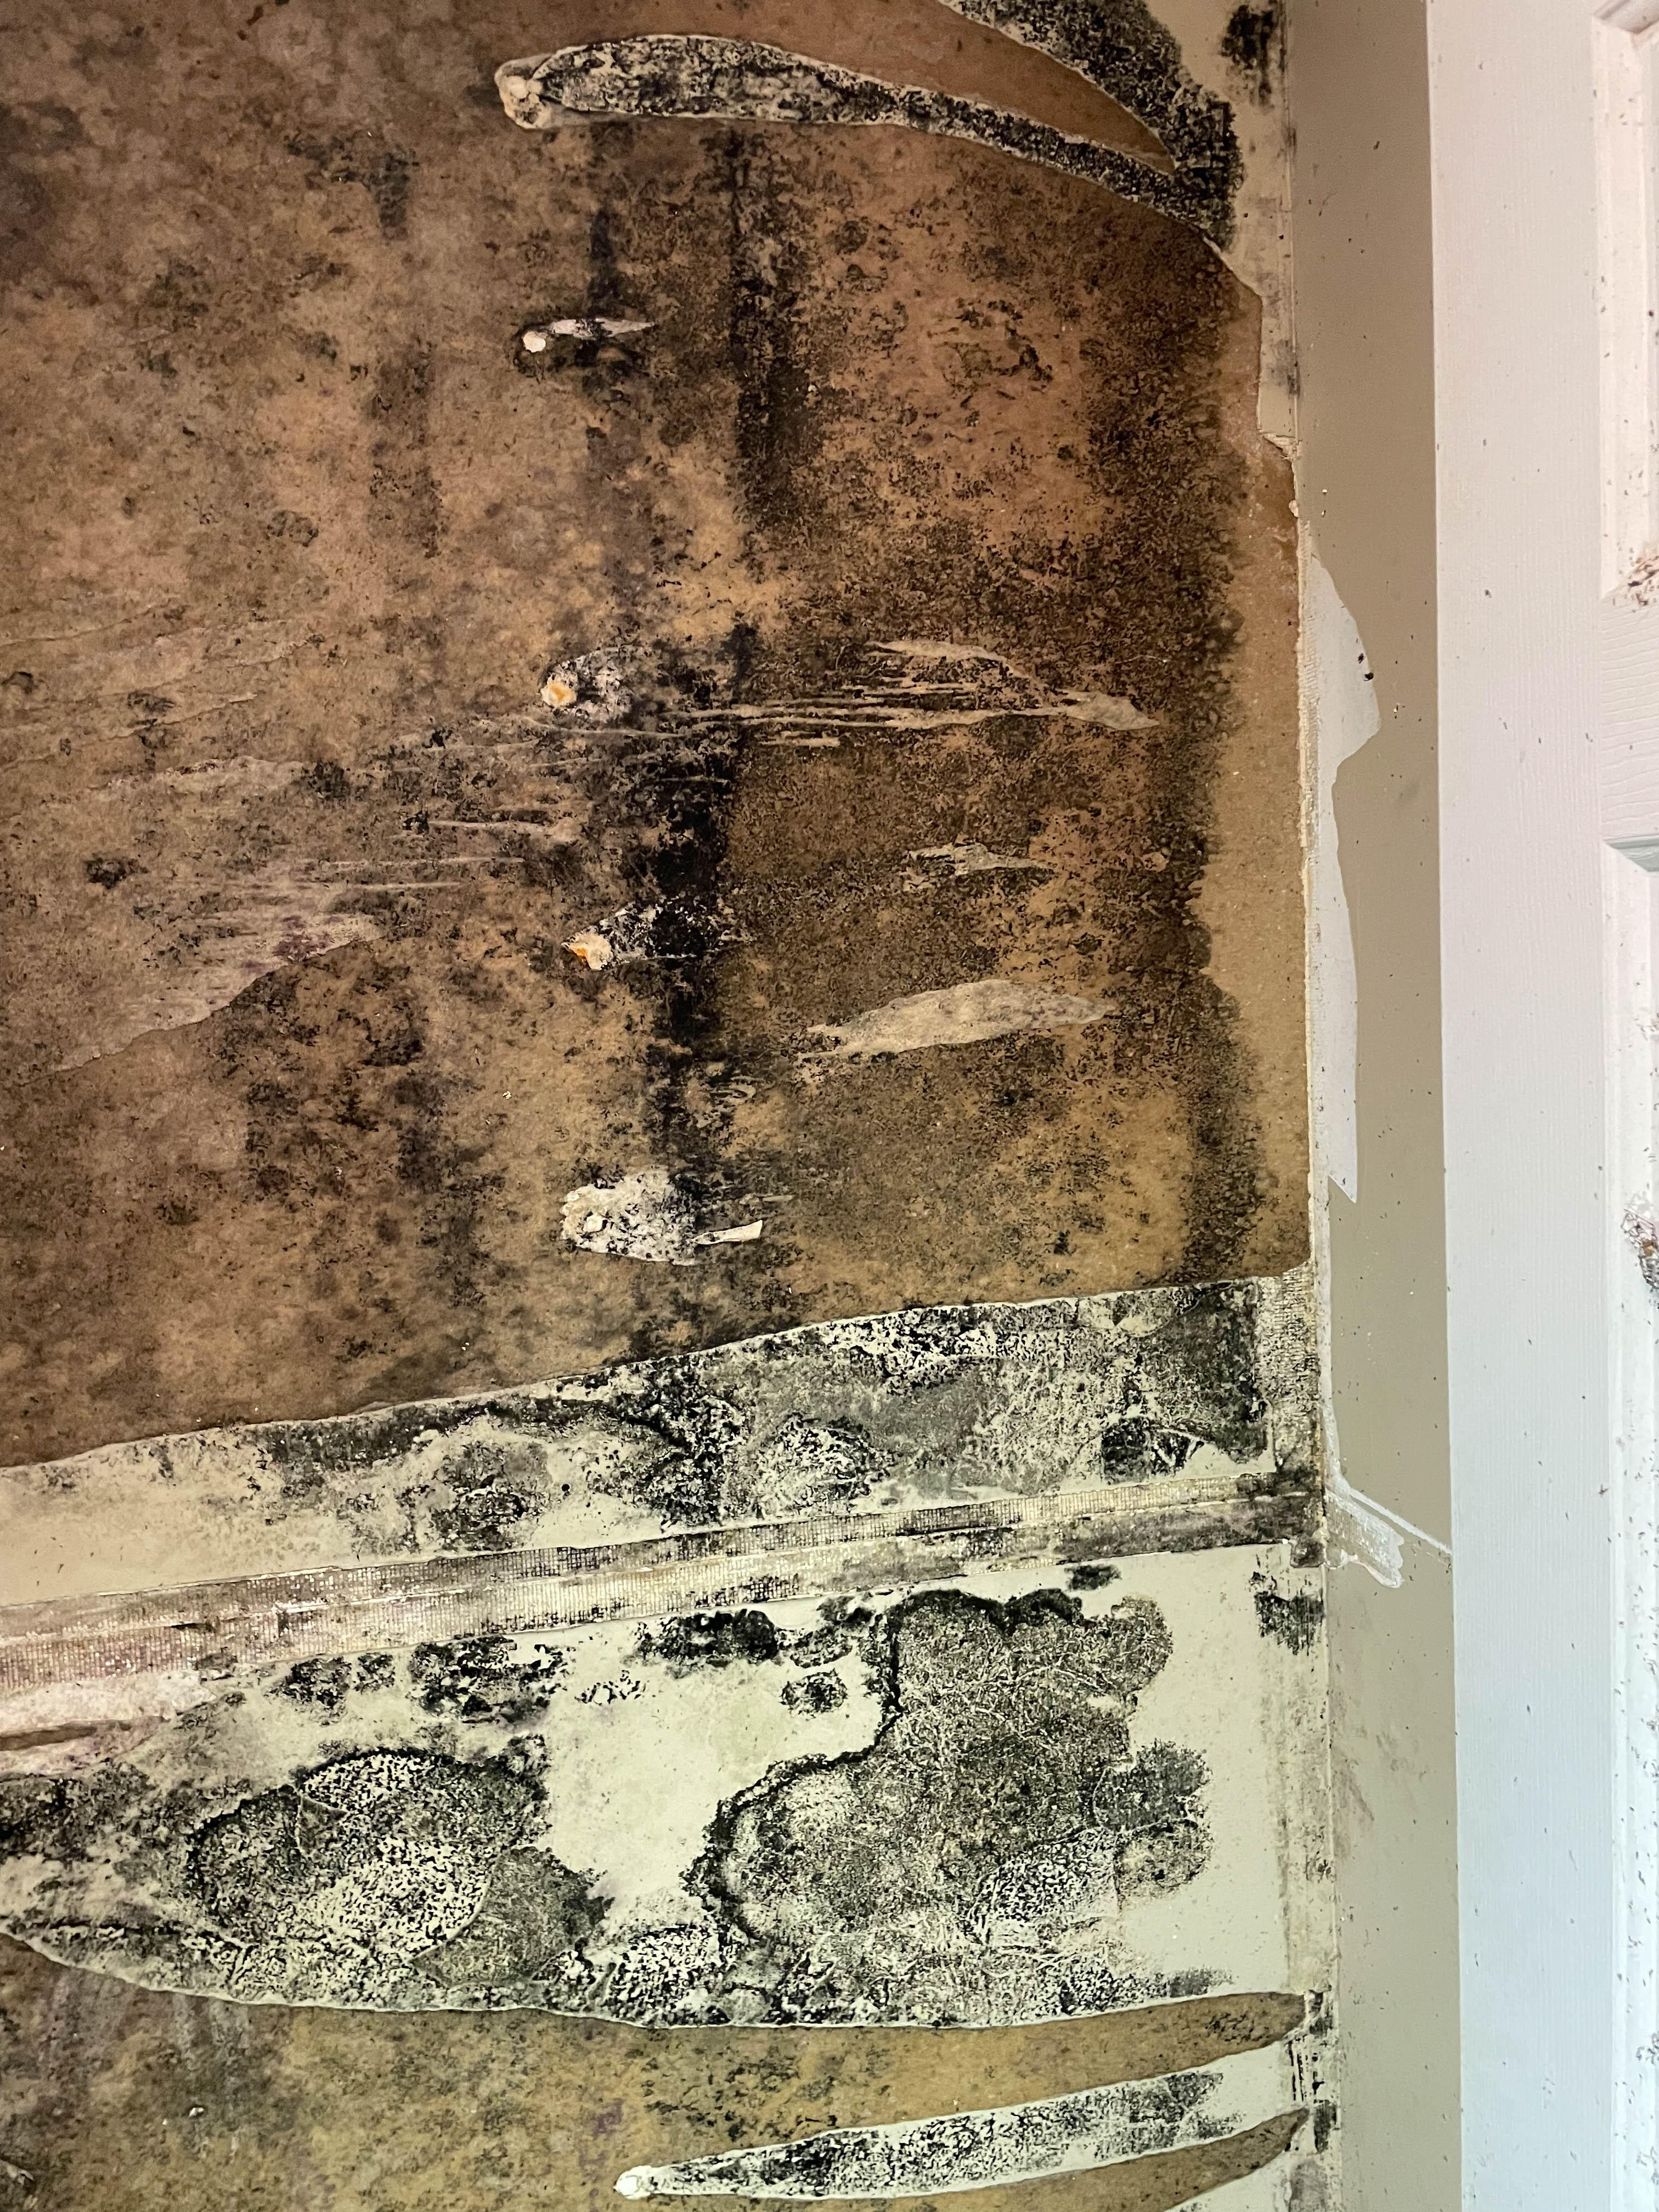 When your home or business in your Norris, TN area suffers from mold damage call SERVPRO of Oak Ridge.